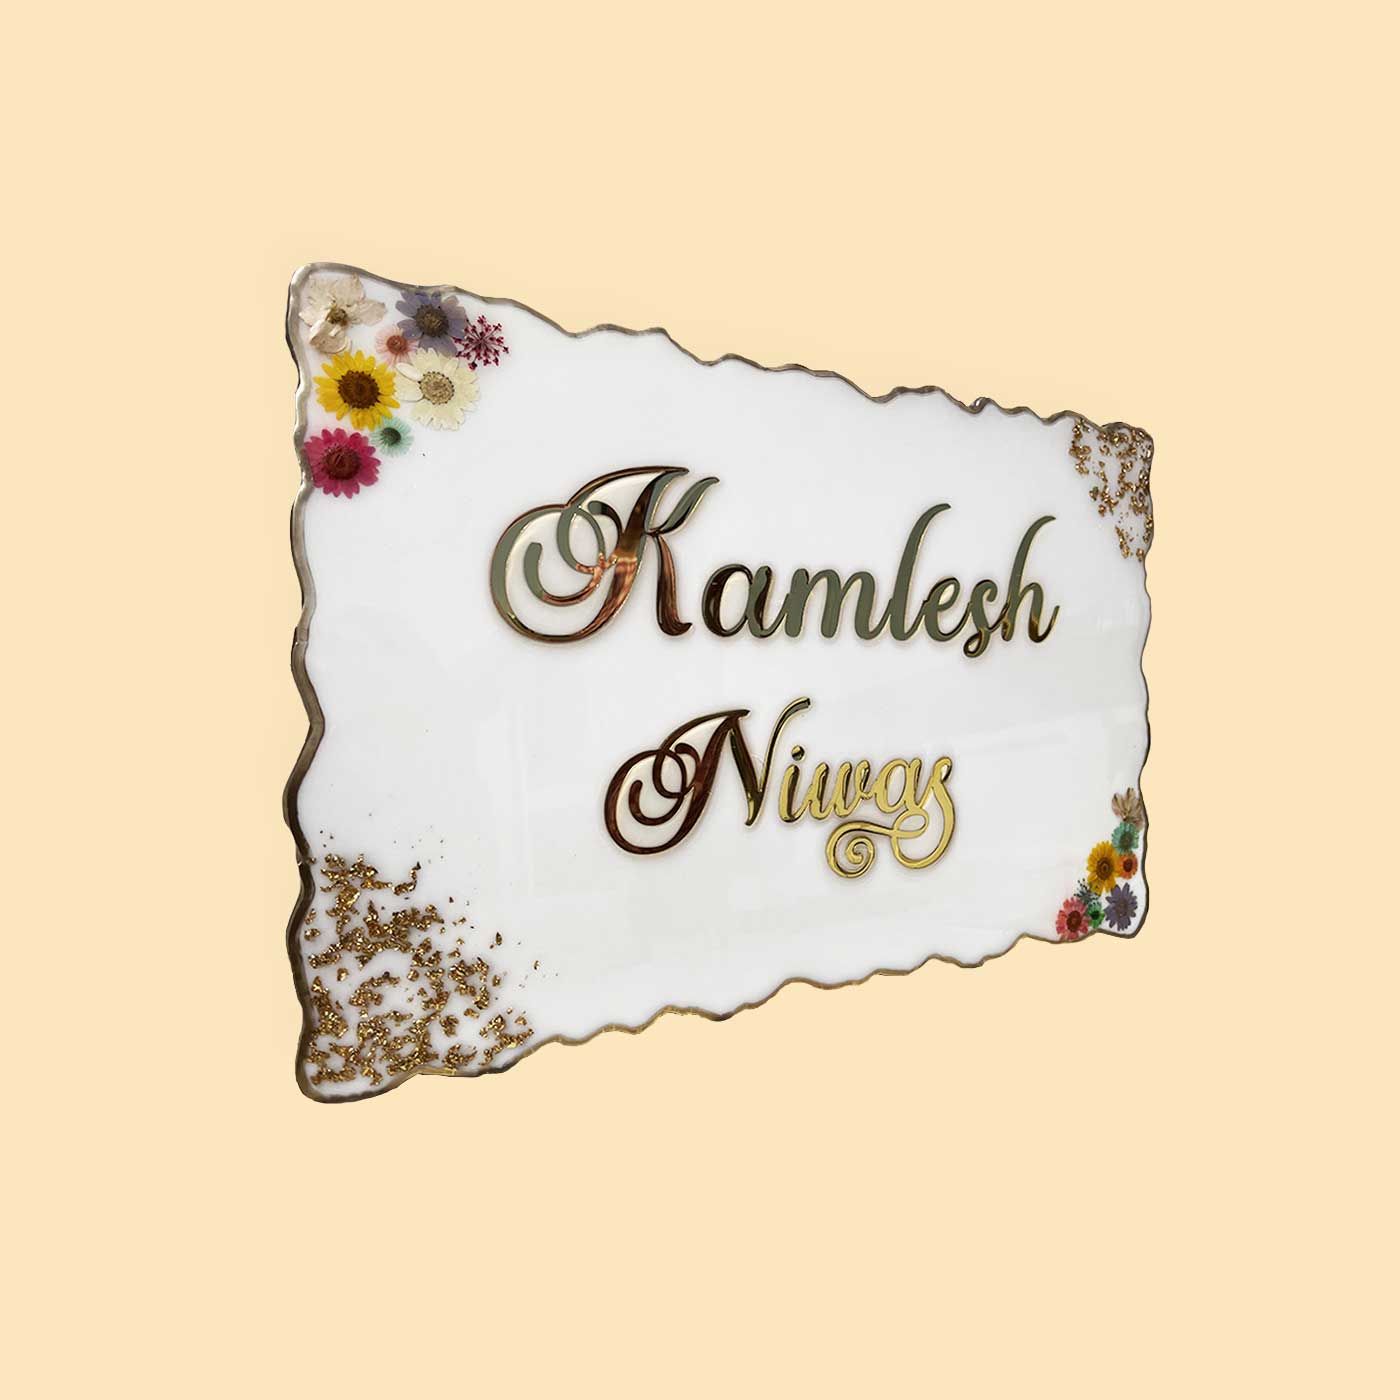 Kamlesh Name Meaning